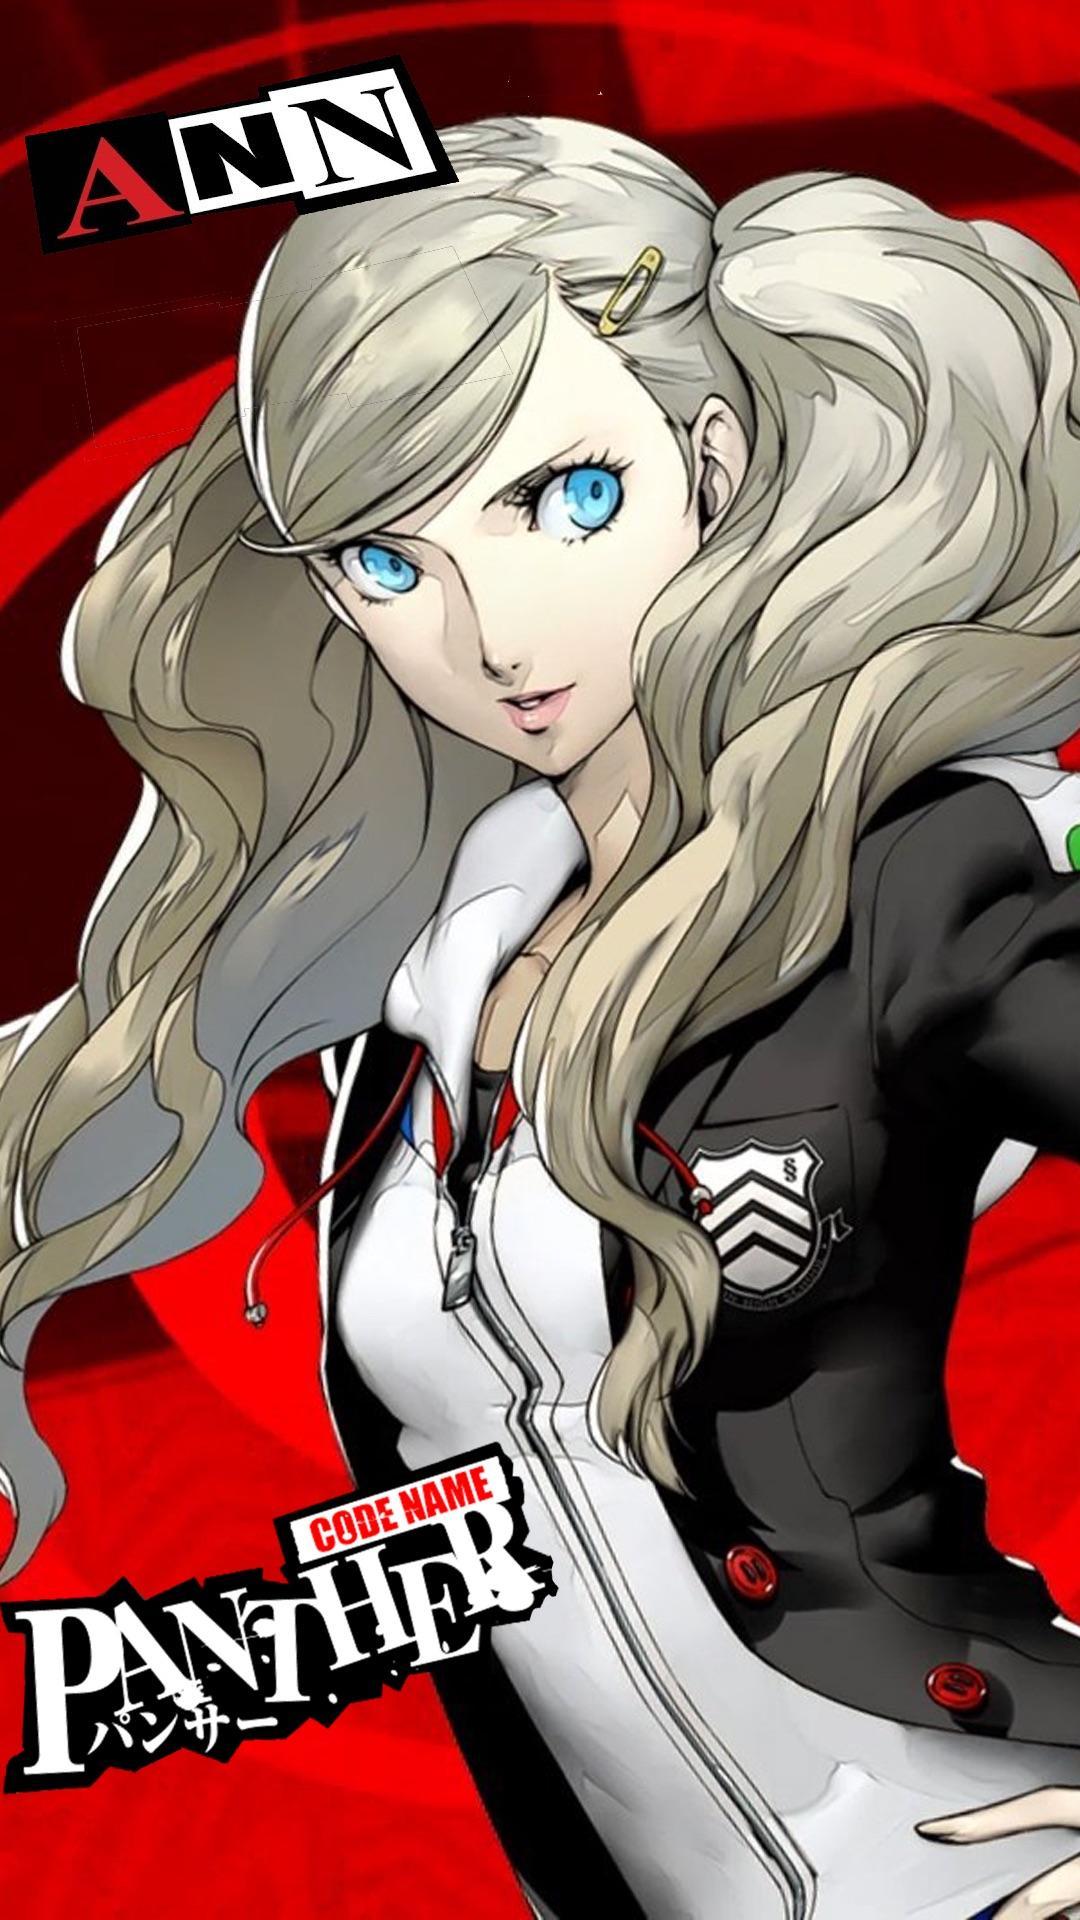 Ann Wallpaper I Made For IPhone 6 6S 7 Plus (1920x1080)